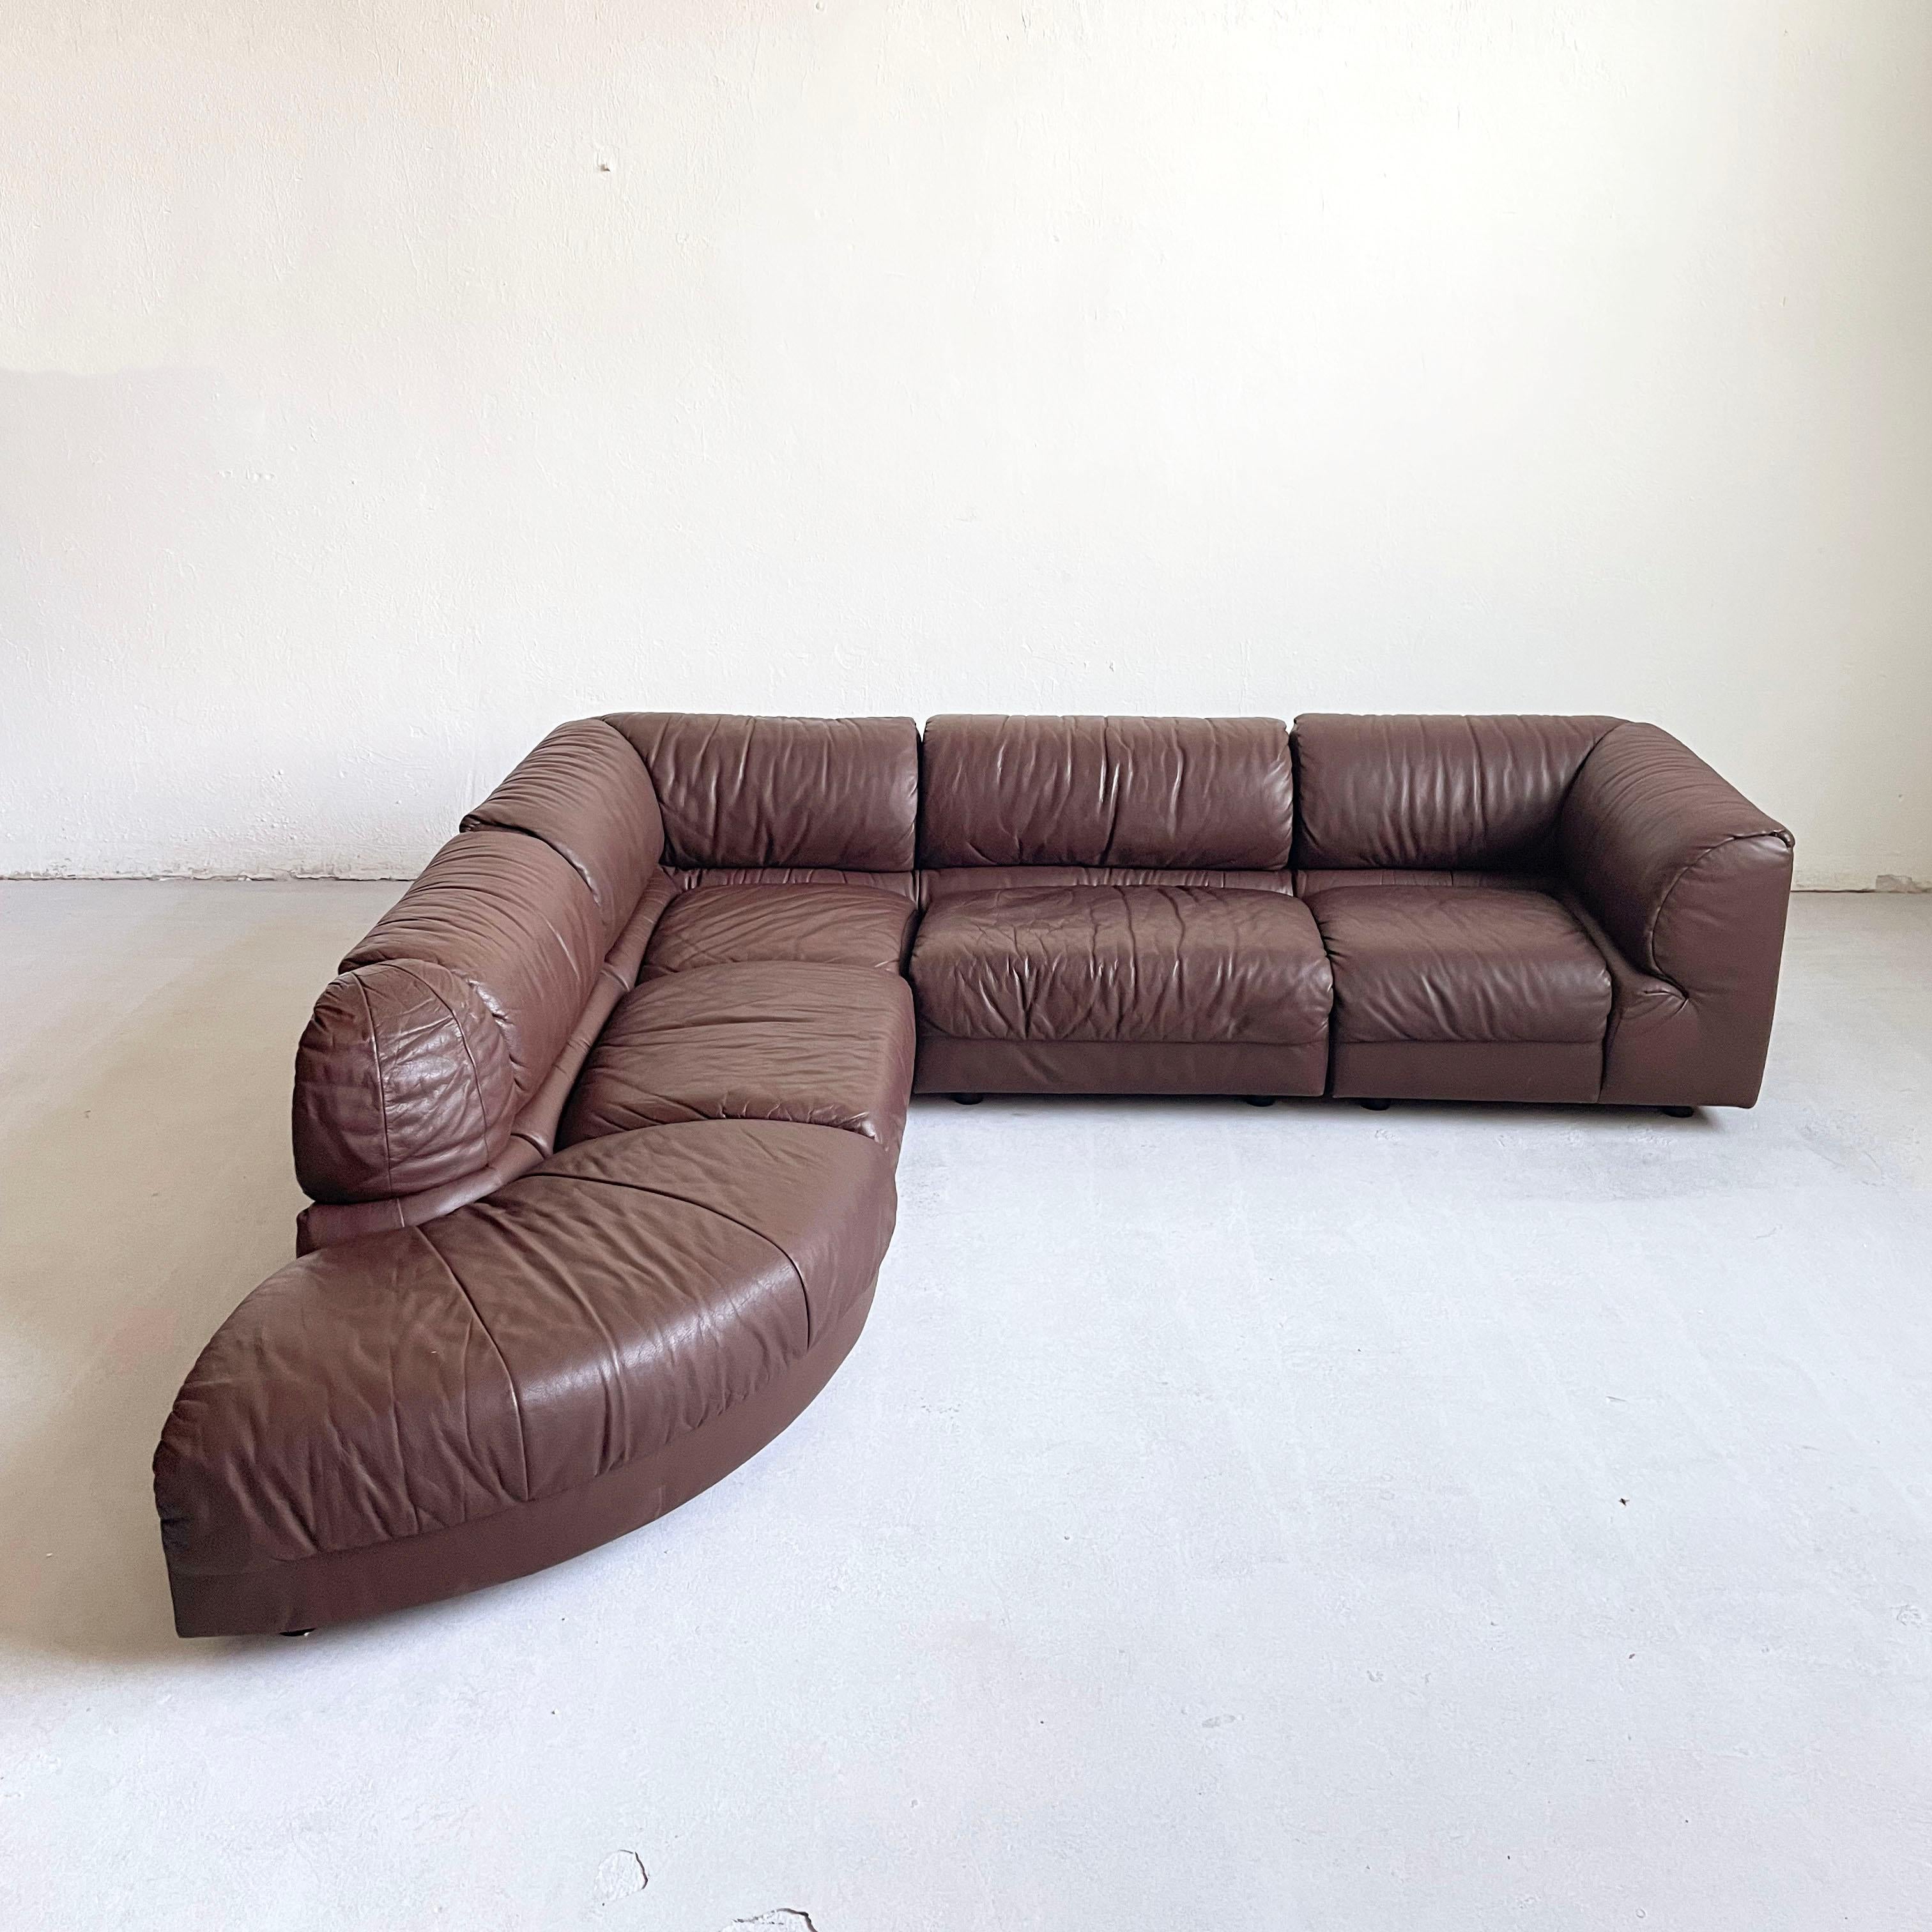 1970s sectional sofa in dark brown leather manufactured by Laauser (the producers label is missing) consisting of 5 modular sections

The sofa is upholstered in a very nice thick supple leather

This sofa is in very good original condition. It